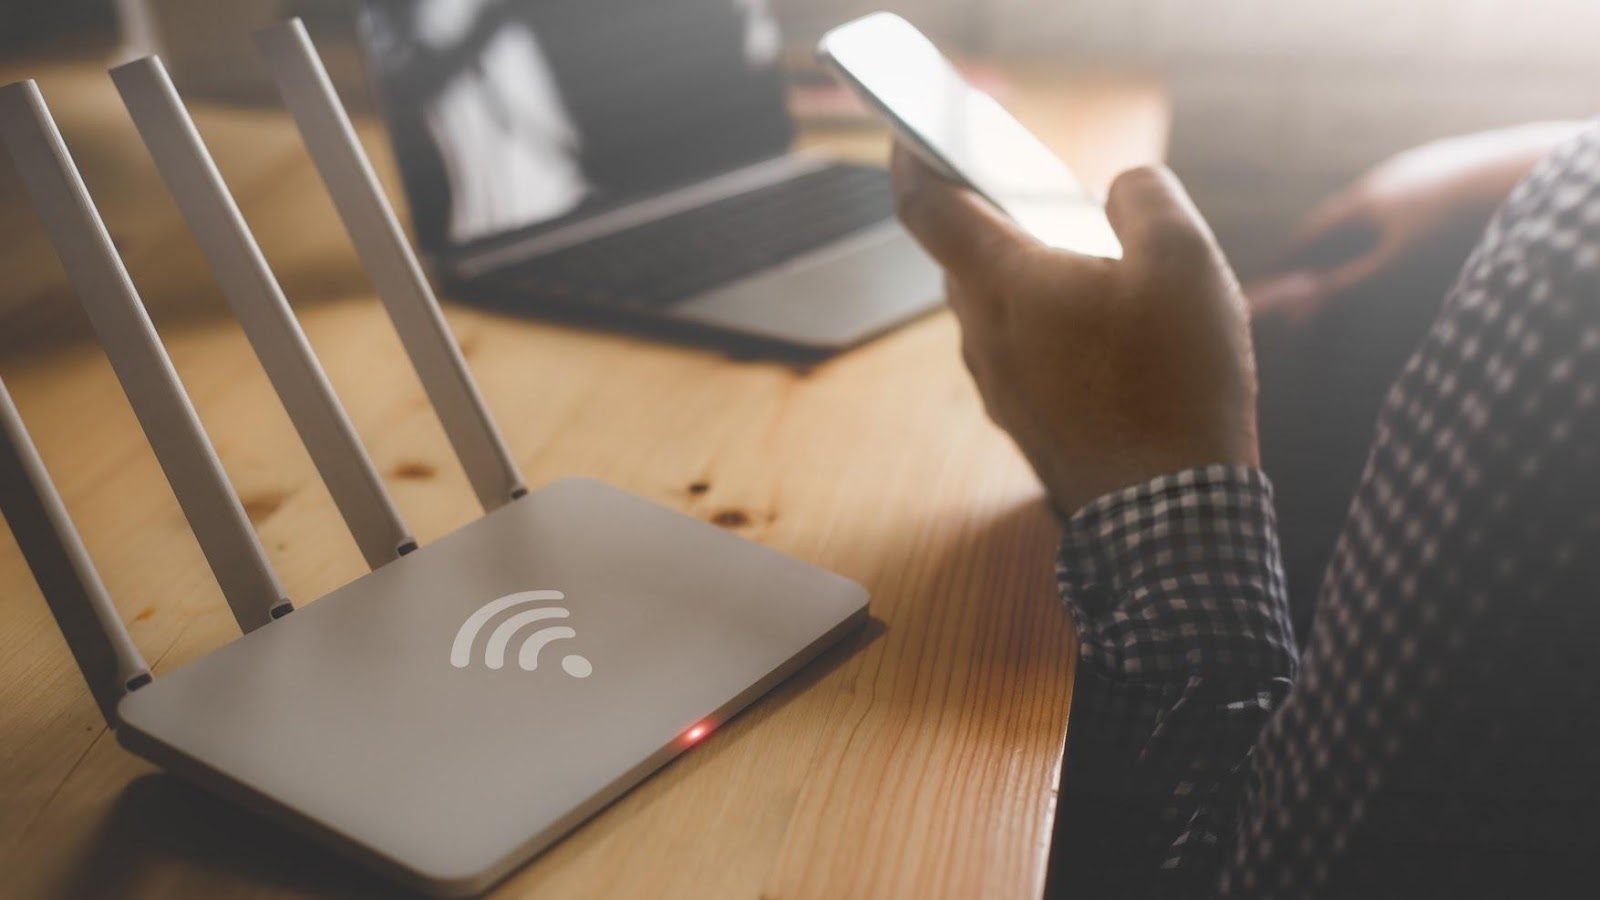 How to See Who's On Your Wi-Fi | PCMag